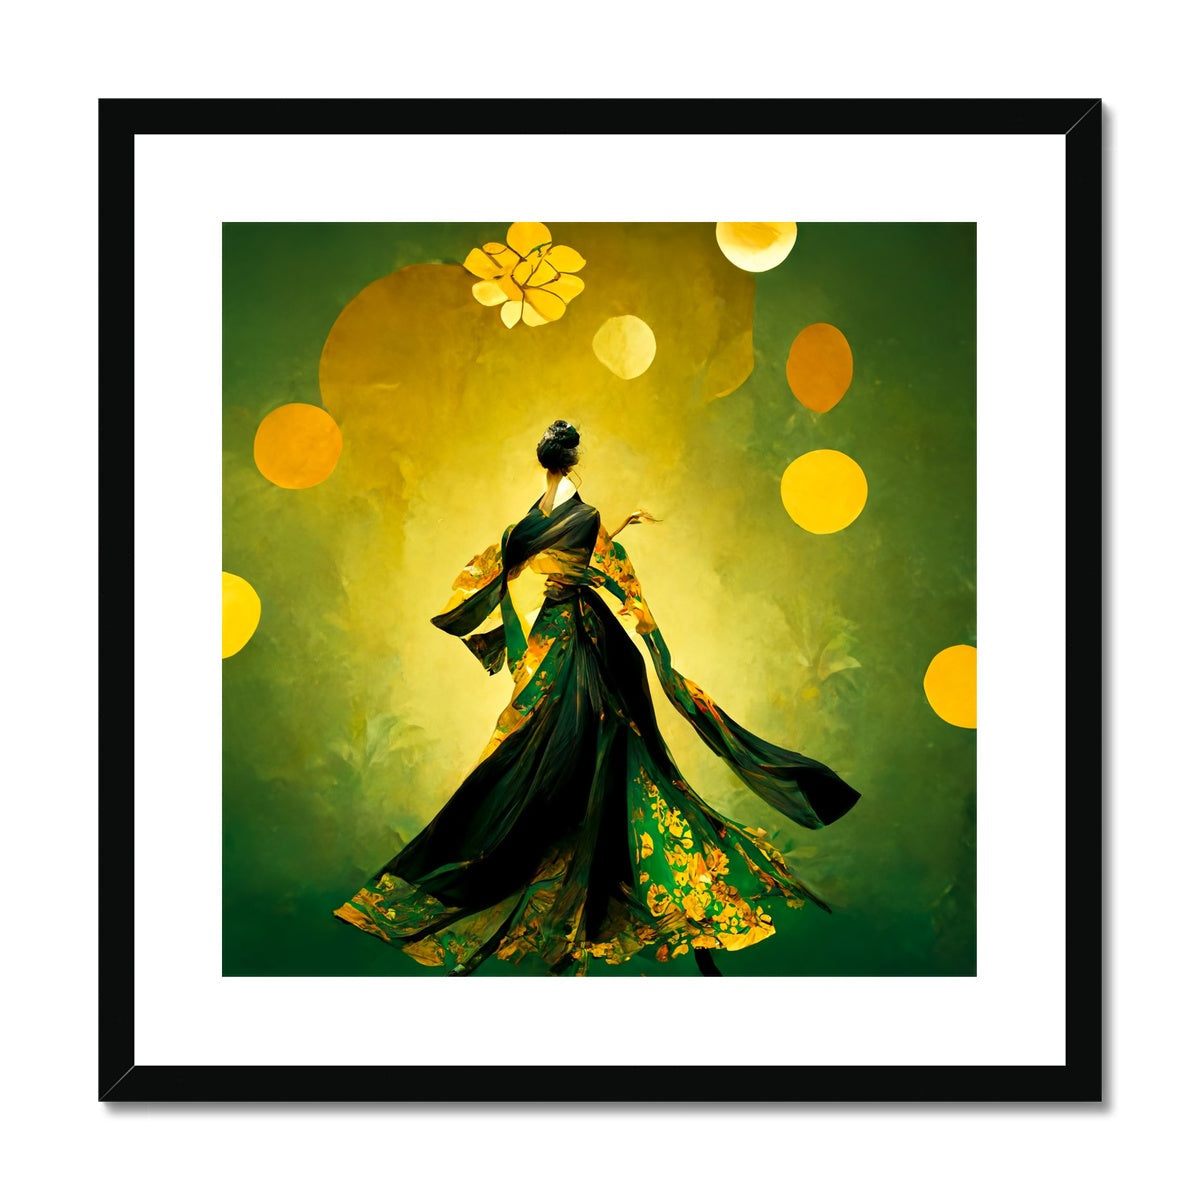 Moon Banquet  Framed & Mounted Print - Pixel Gallery